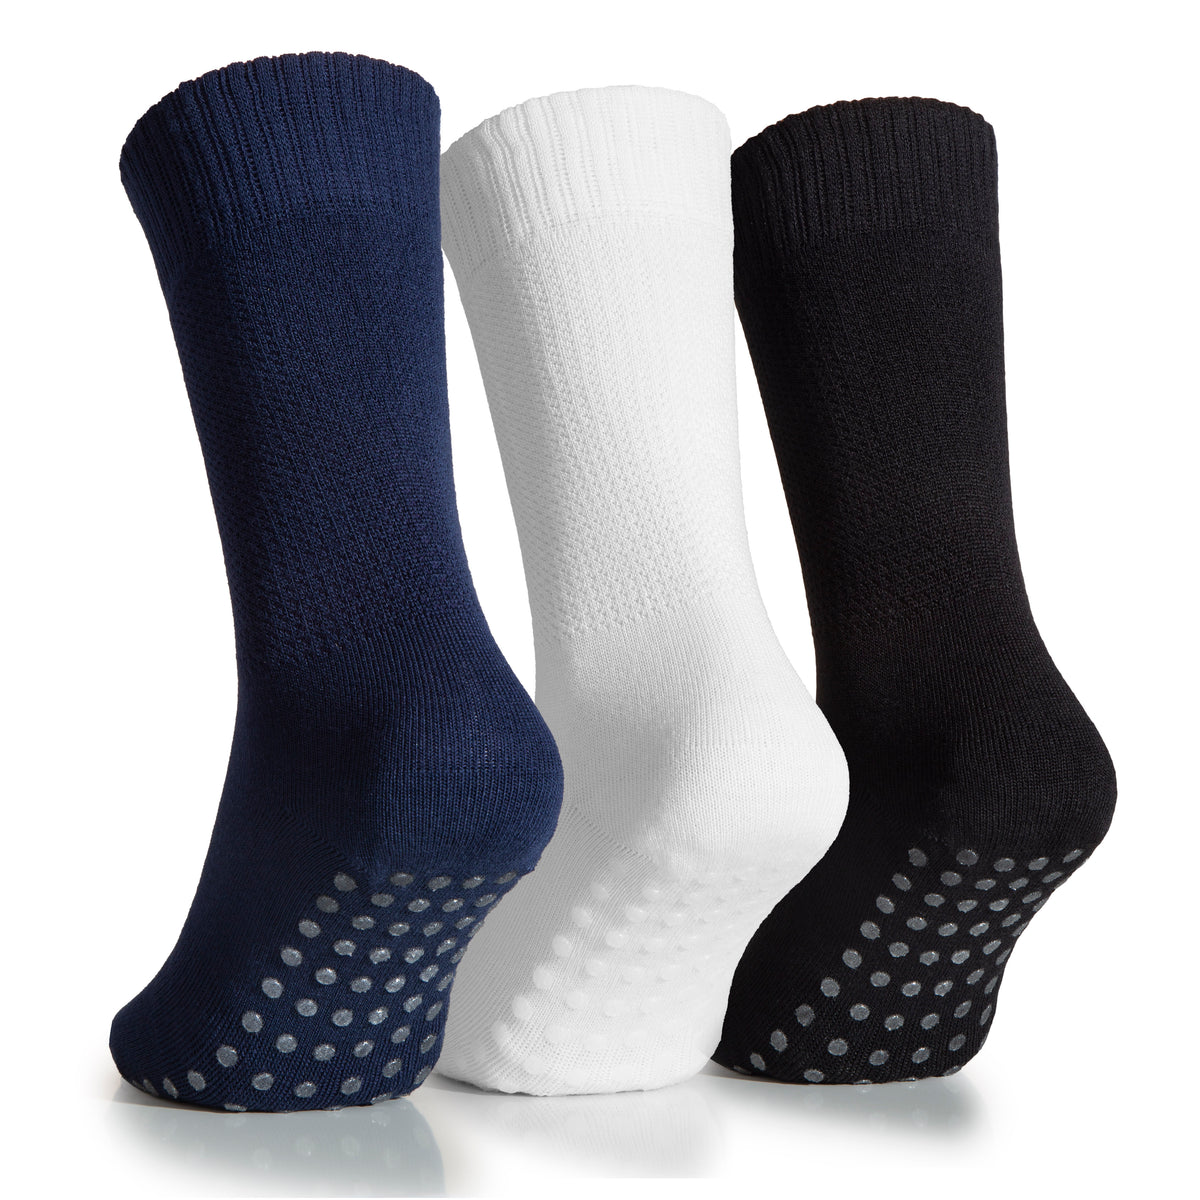 The image shows three pairs of Women's Bamboo Diabetic Ankle Socks with Non Slip Grip. The socks are black, white, and blue, and have dotted bottoms for added grip.